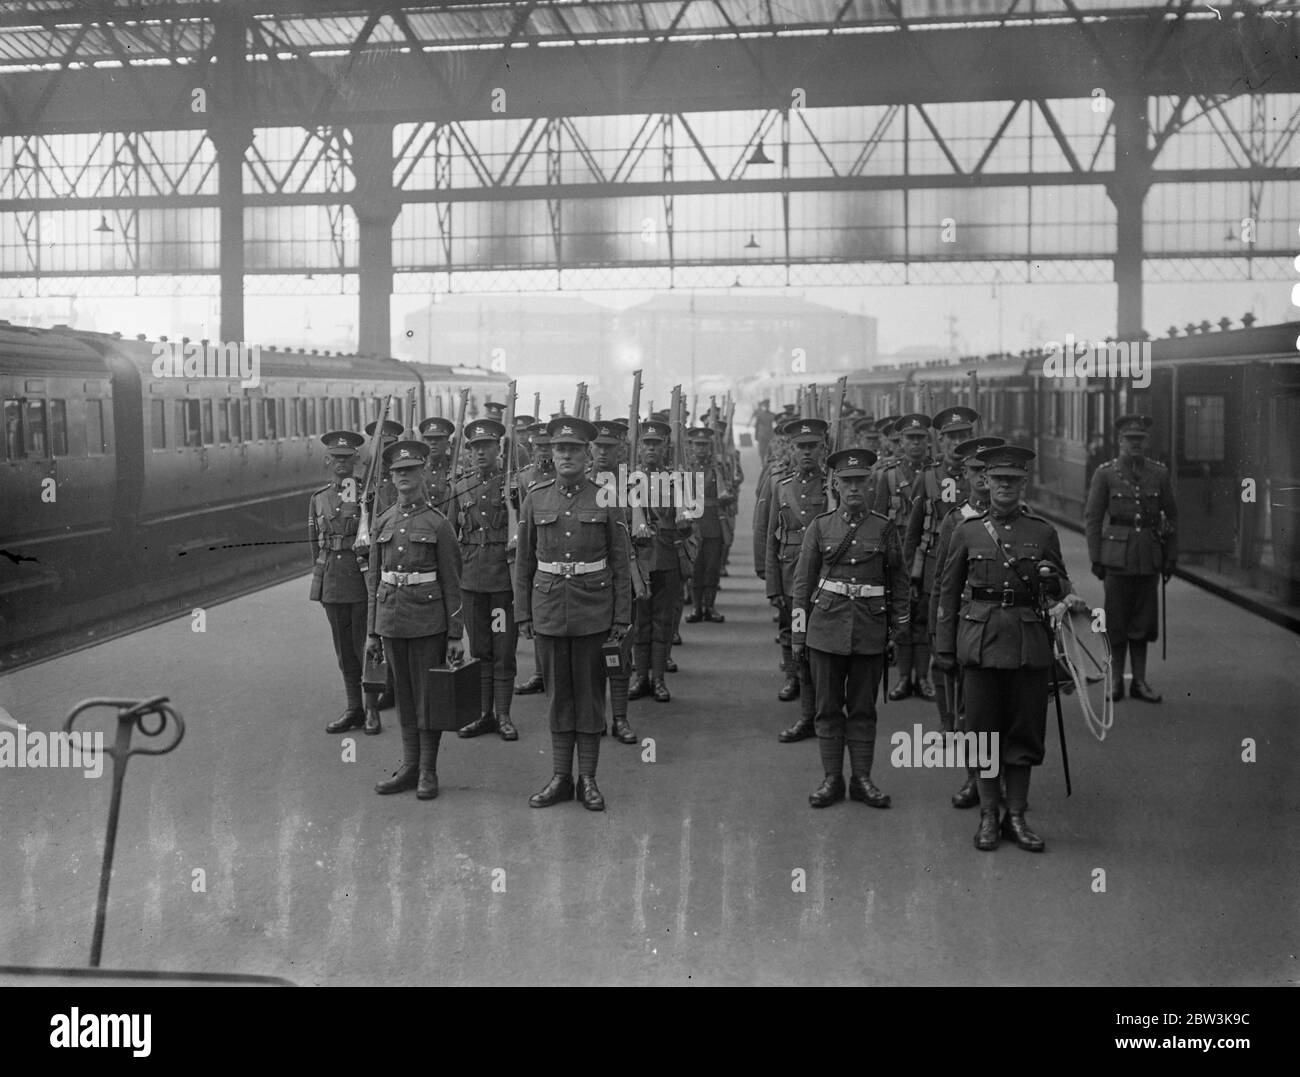 Advance Guard of 2 West Yorks arrive for Tower duty , men the king praised . The advance guard of the 2 Battalion the West Yorkshire Regiment ( the Prince of Wales Own ) arrived at Waterloo Station from Aldershot and marched to the Tower of London . The battalion is to relieve the 1 Welsh Guards atthe Tower . It is thought that its selection for Tower Duty , which is regarded as a high honour , is due largely to the fine bearing and marching of the battalion at King George ' s Silver Jubilee Review last summer . King Edward , then Prince of Wales , commented at the time ' They march like the G Stock Photo